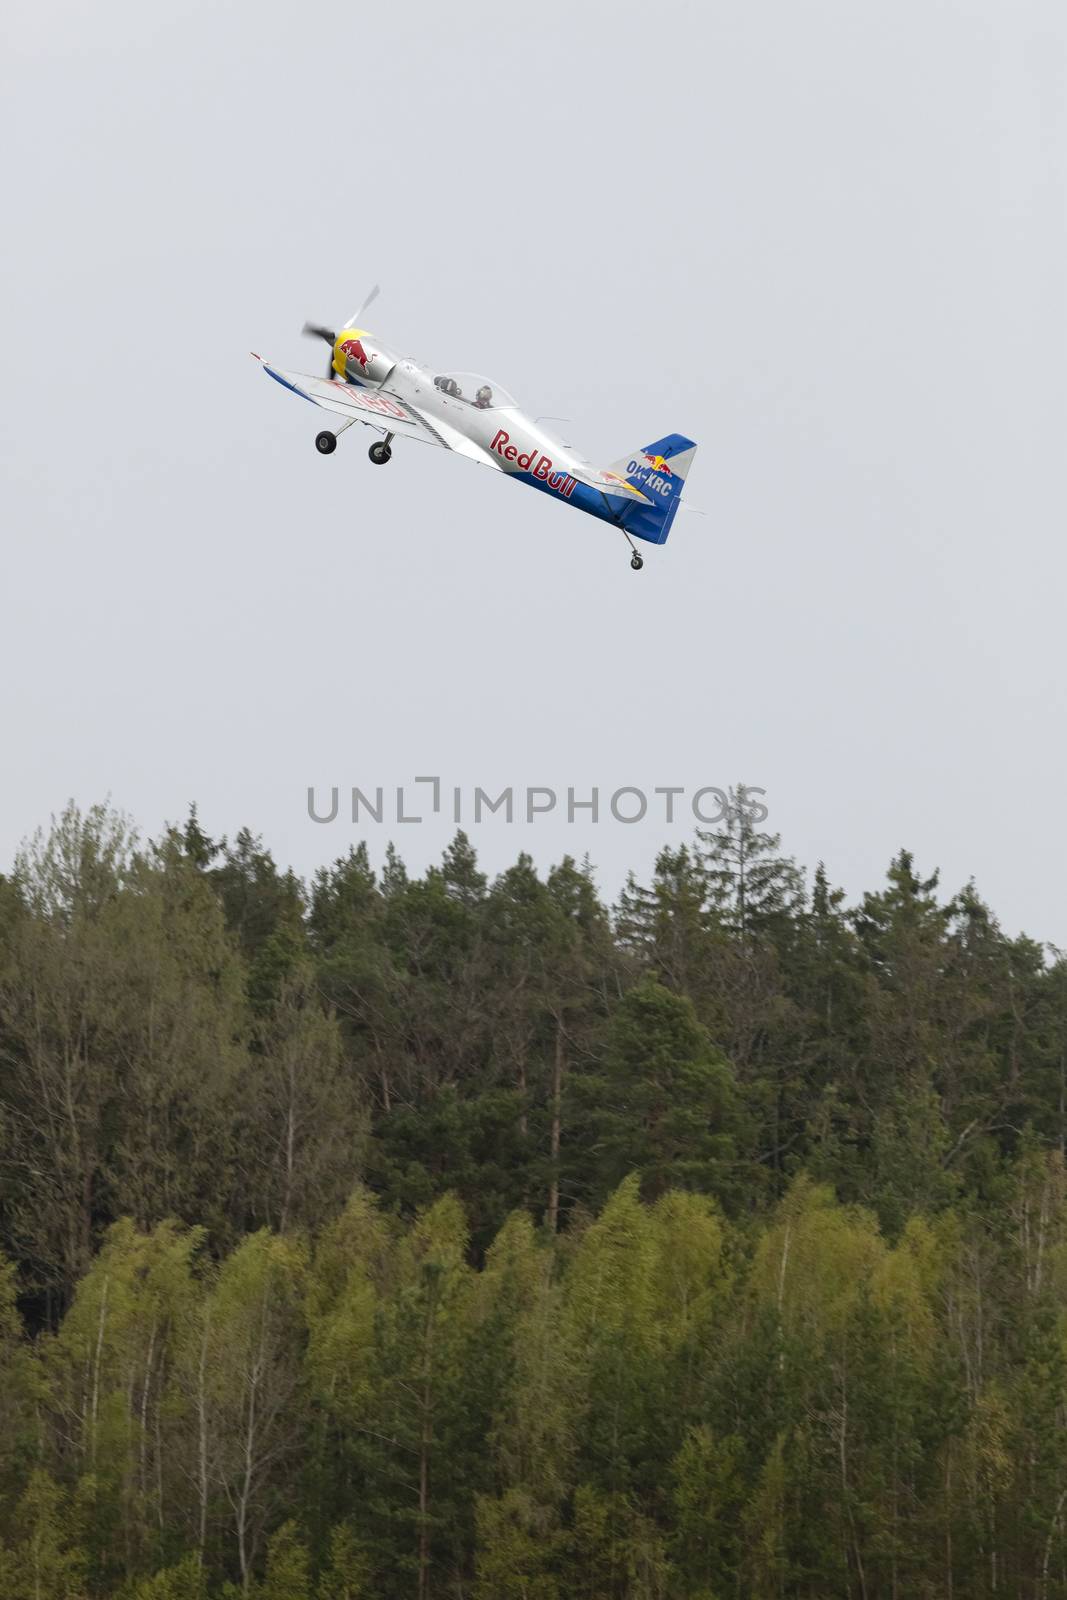 Plasy, Czech Republic - April 27, 2013: The Flying Bulls Aerobatics Team on the Airshow "The Day on Air". The team fly four modified Zlin Z-50 LX aircraft, painted in the colors of Red Bull energy drink for sponsorship reasons